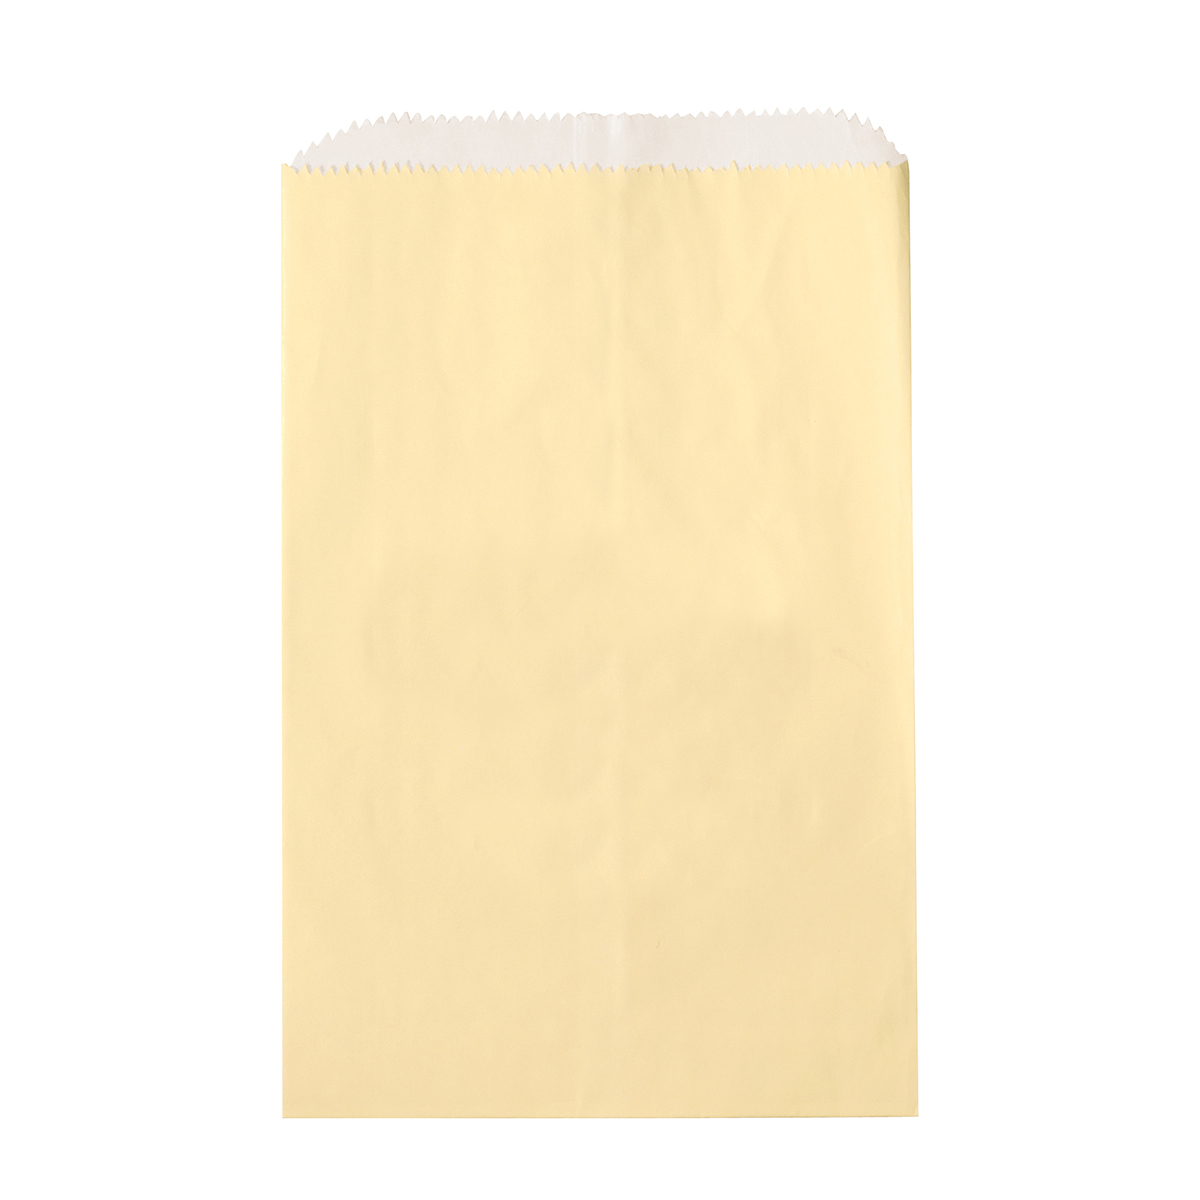 Cream Glassine Lined 1# Paper Cookie, Candy And Nut Bag